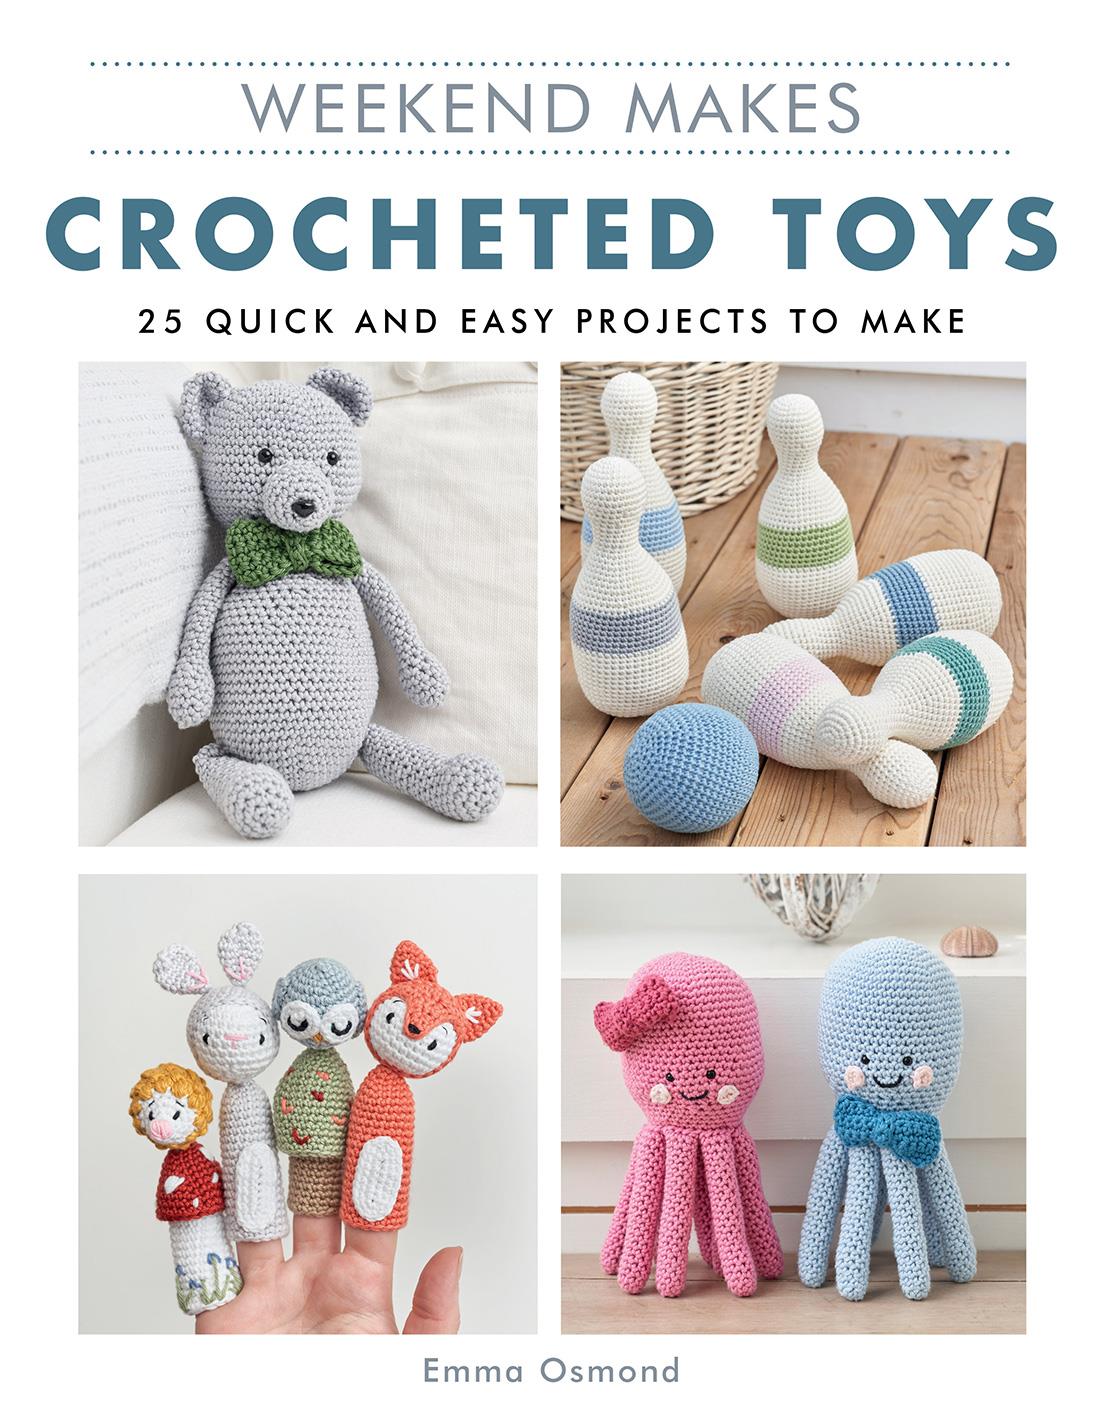 Weekend Makes Crocheted Toys - Pattern Book by Emma Osmond